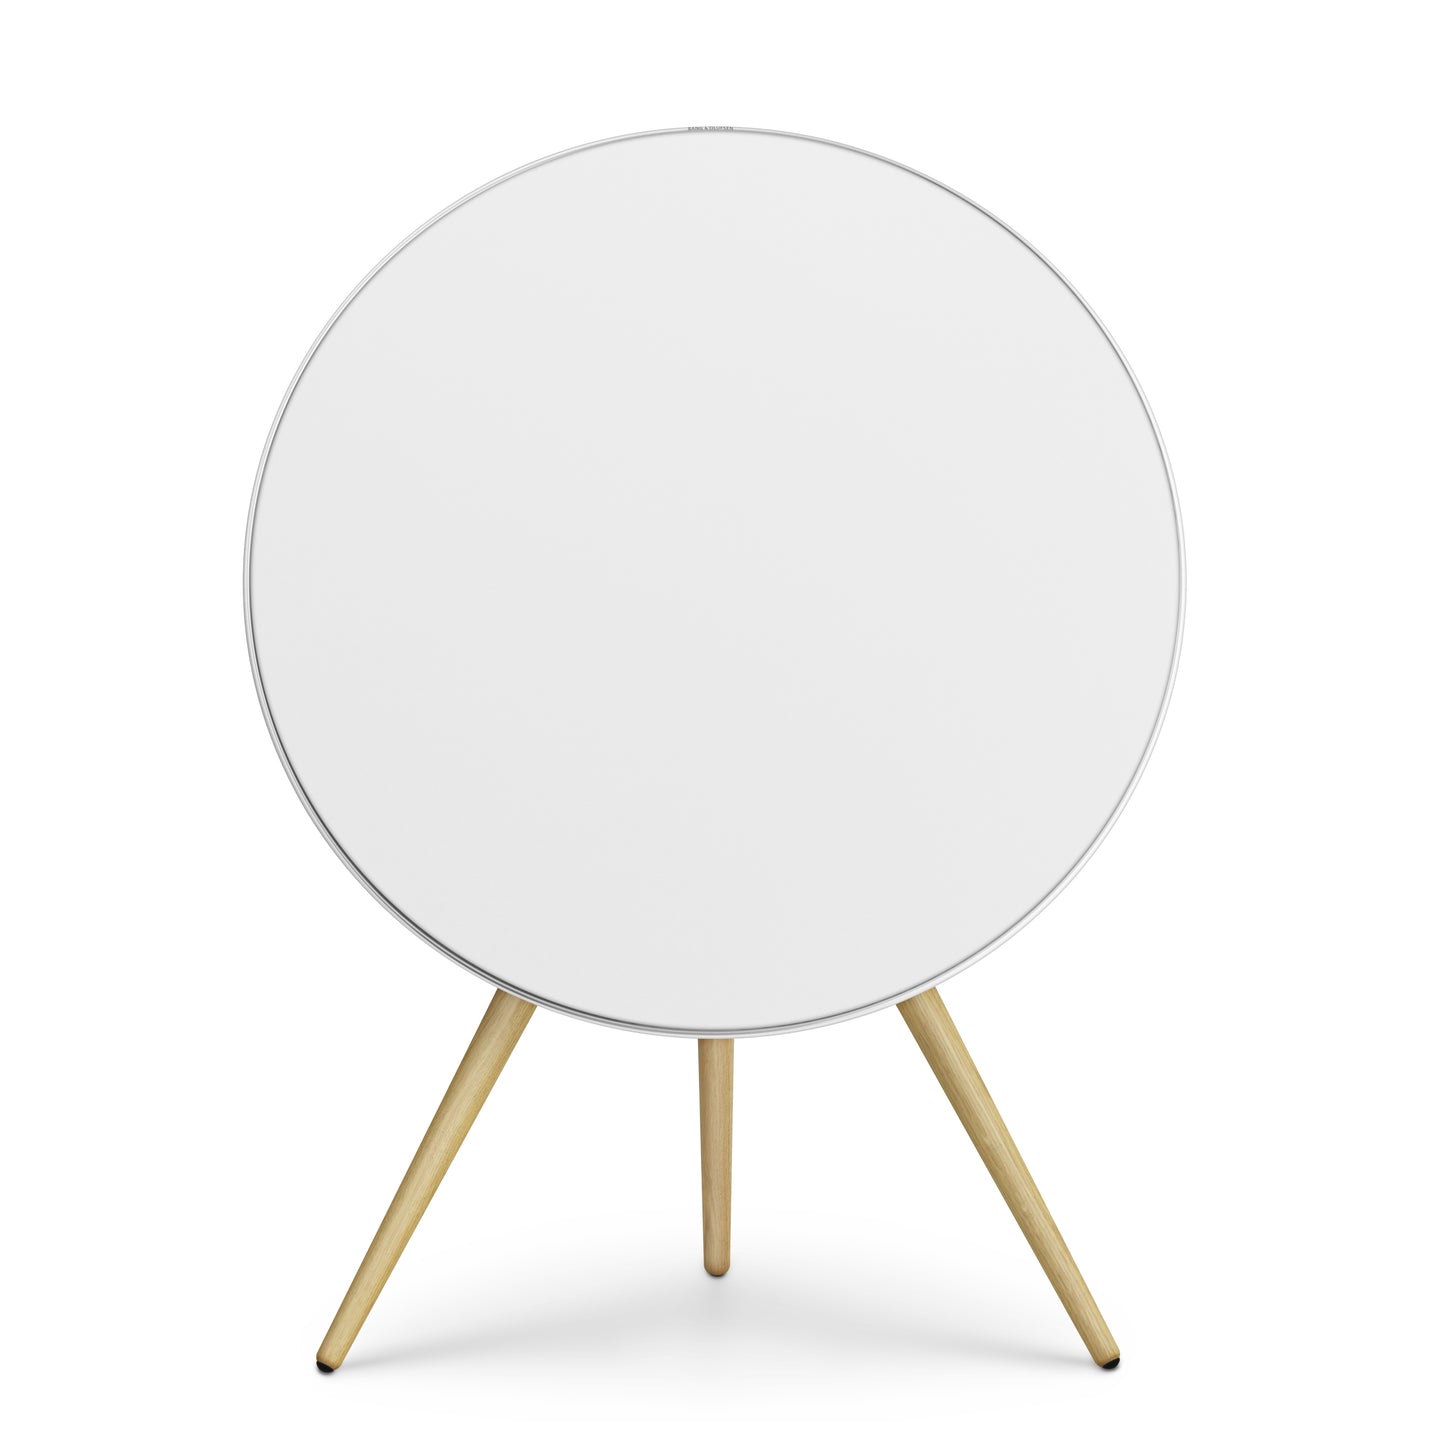 Bang & Olufsen BeoPlay A9 - 4. Generation mit Google Assistant